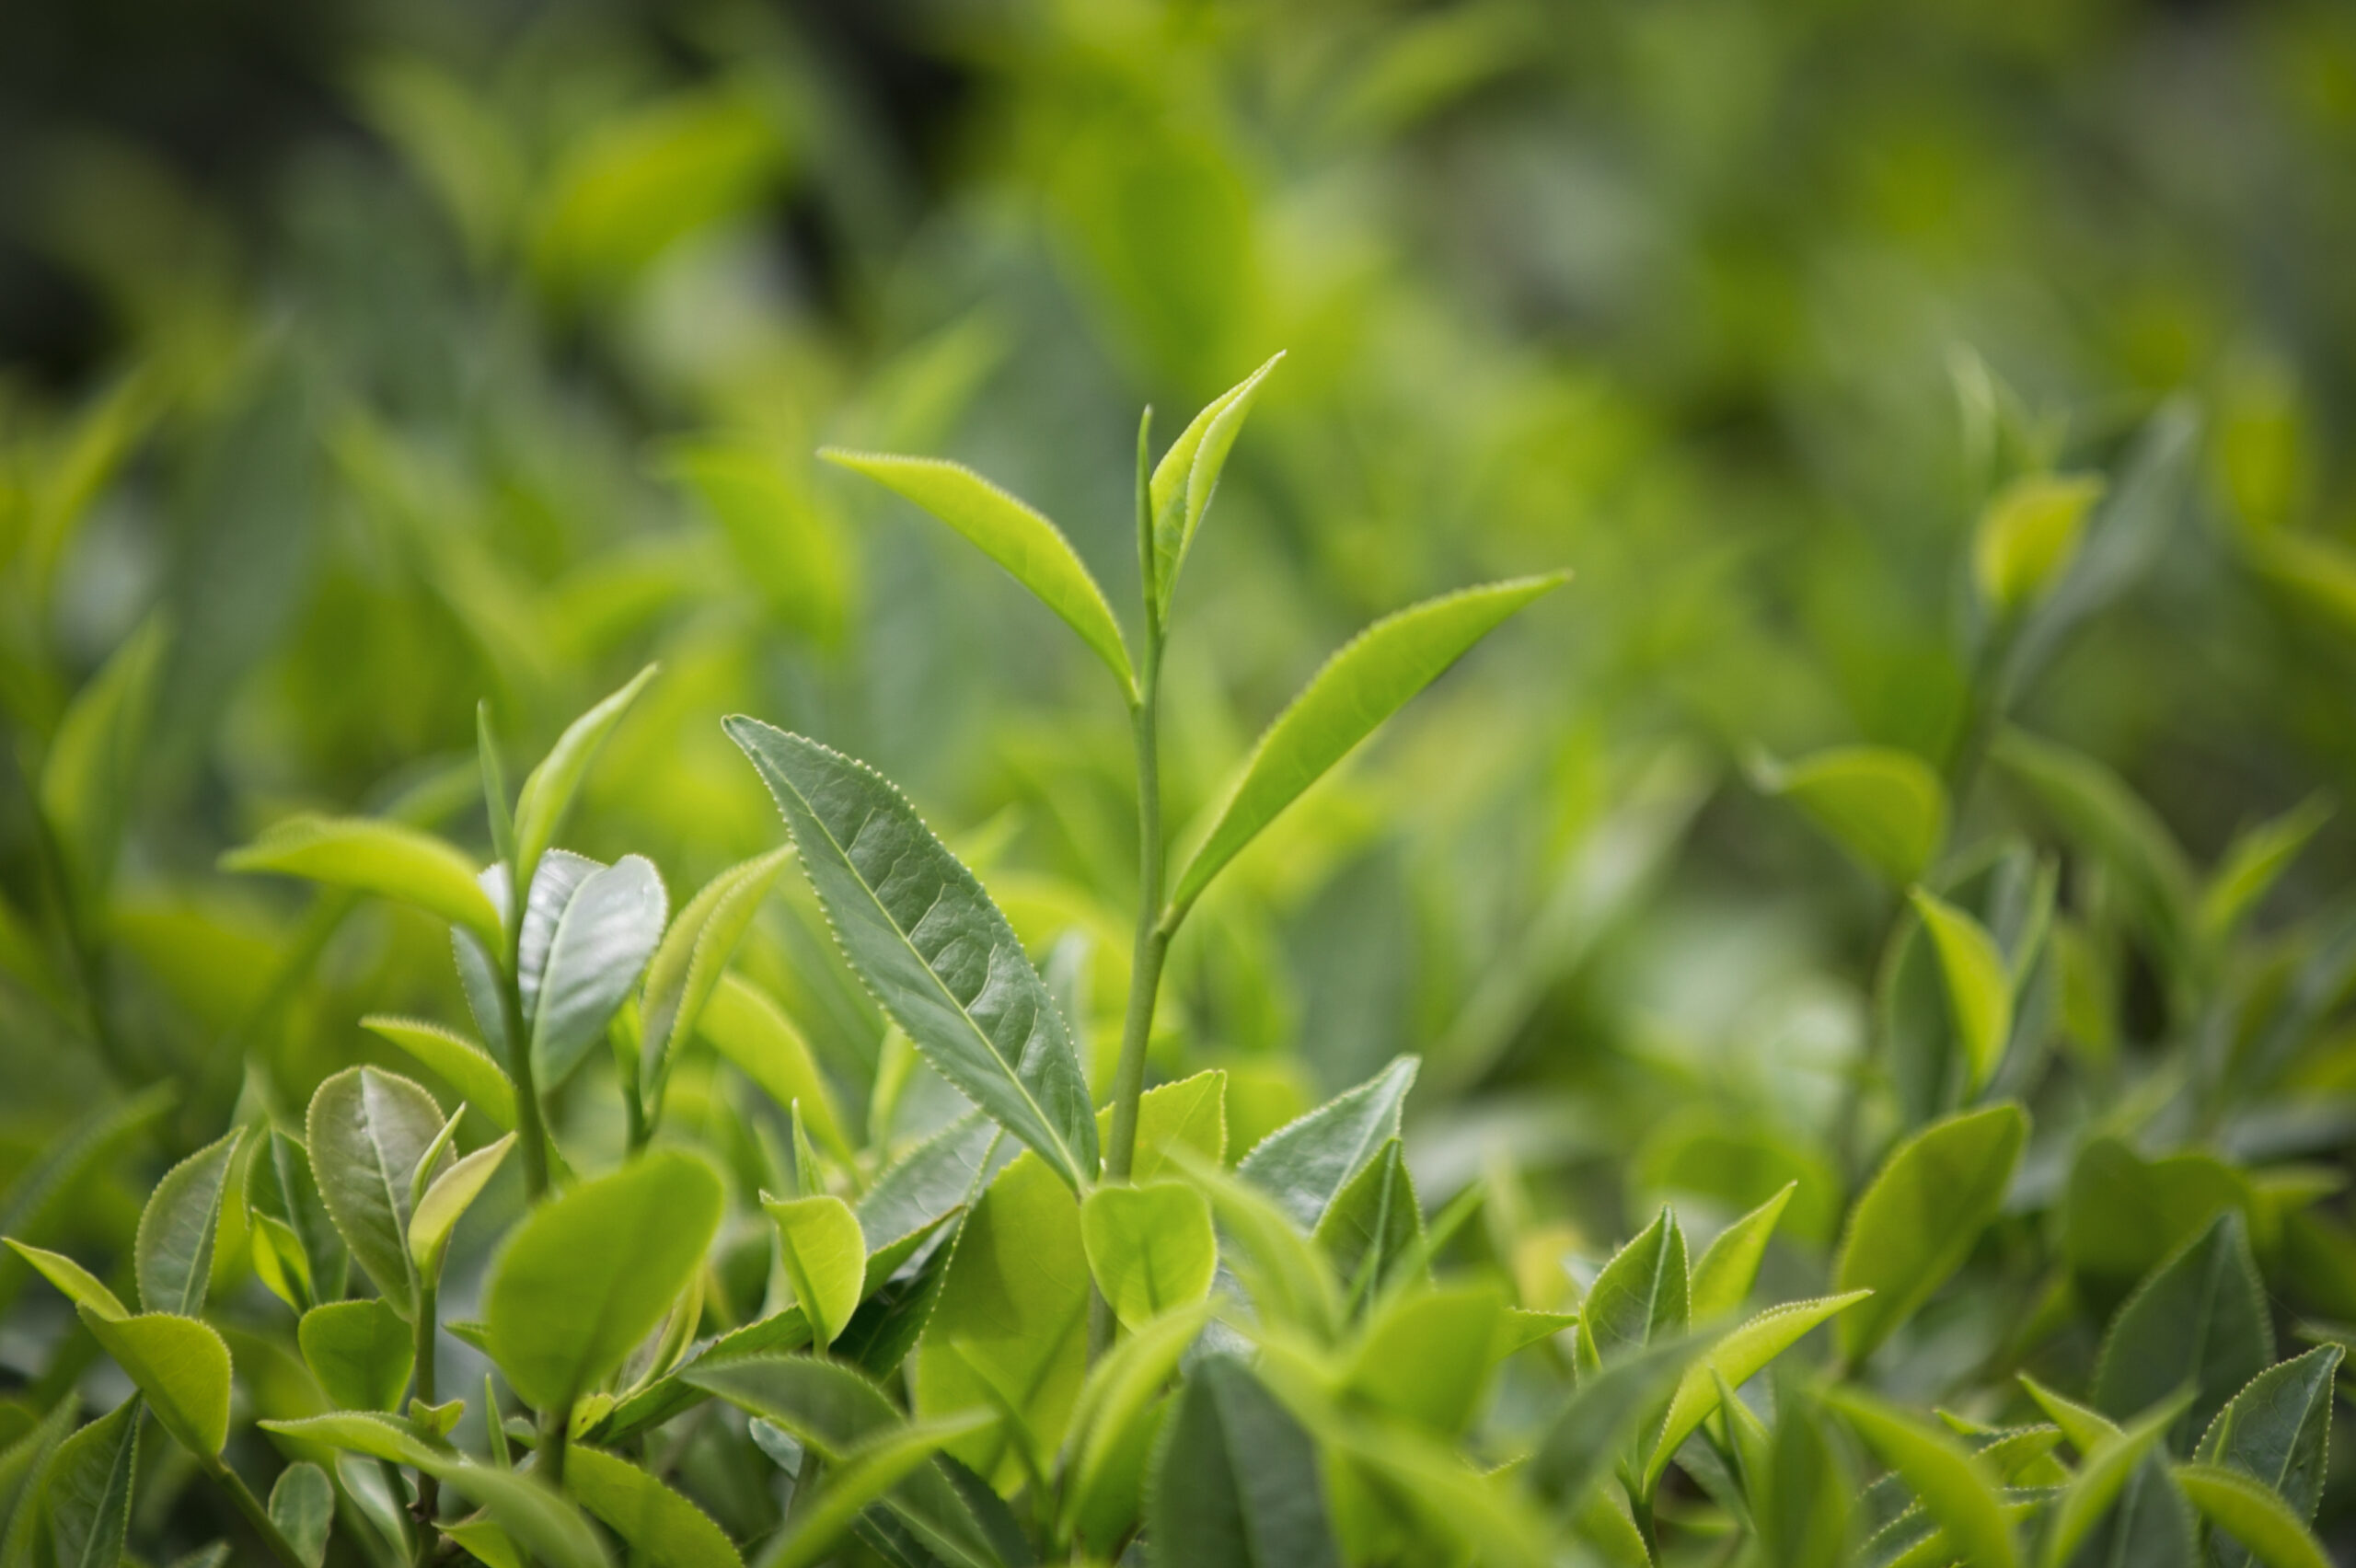 Organic tea leaves are the main ingredients in many beverage products from FGC